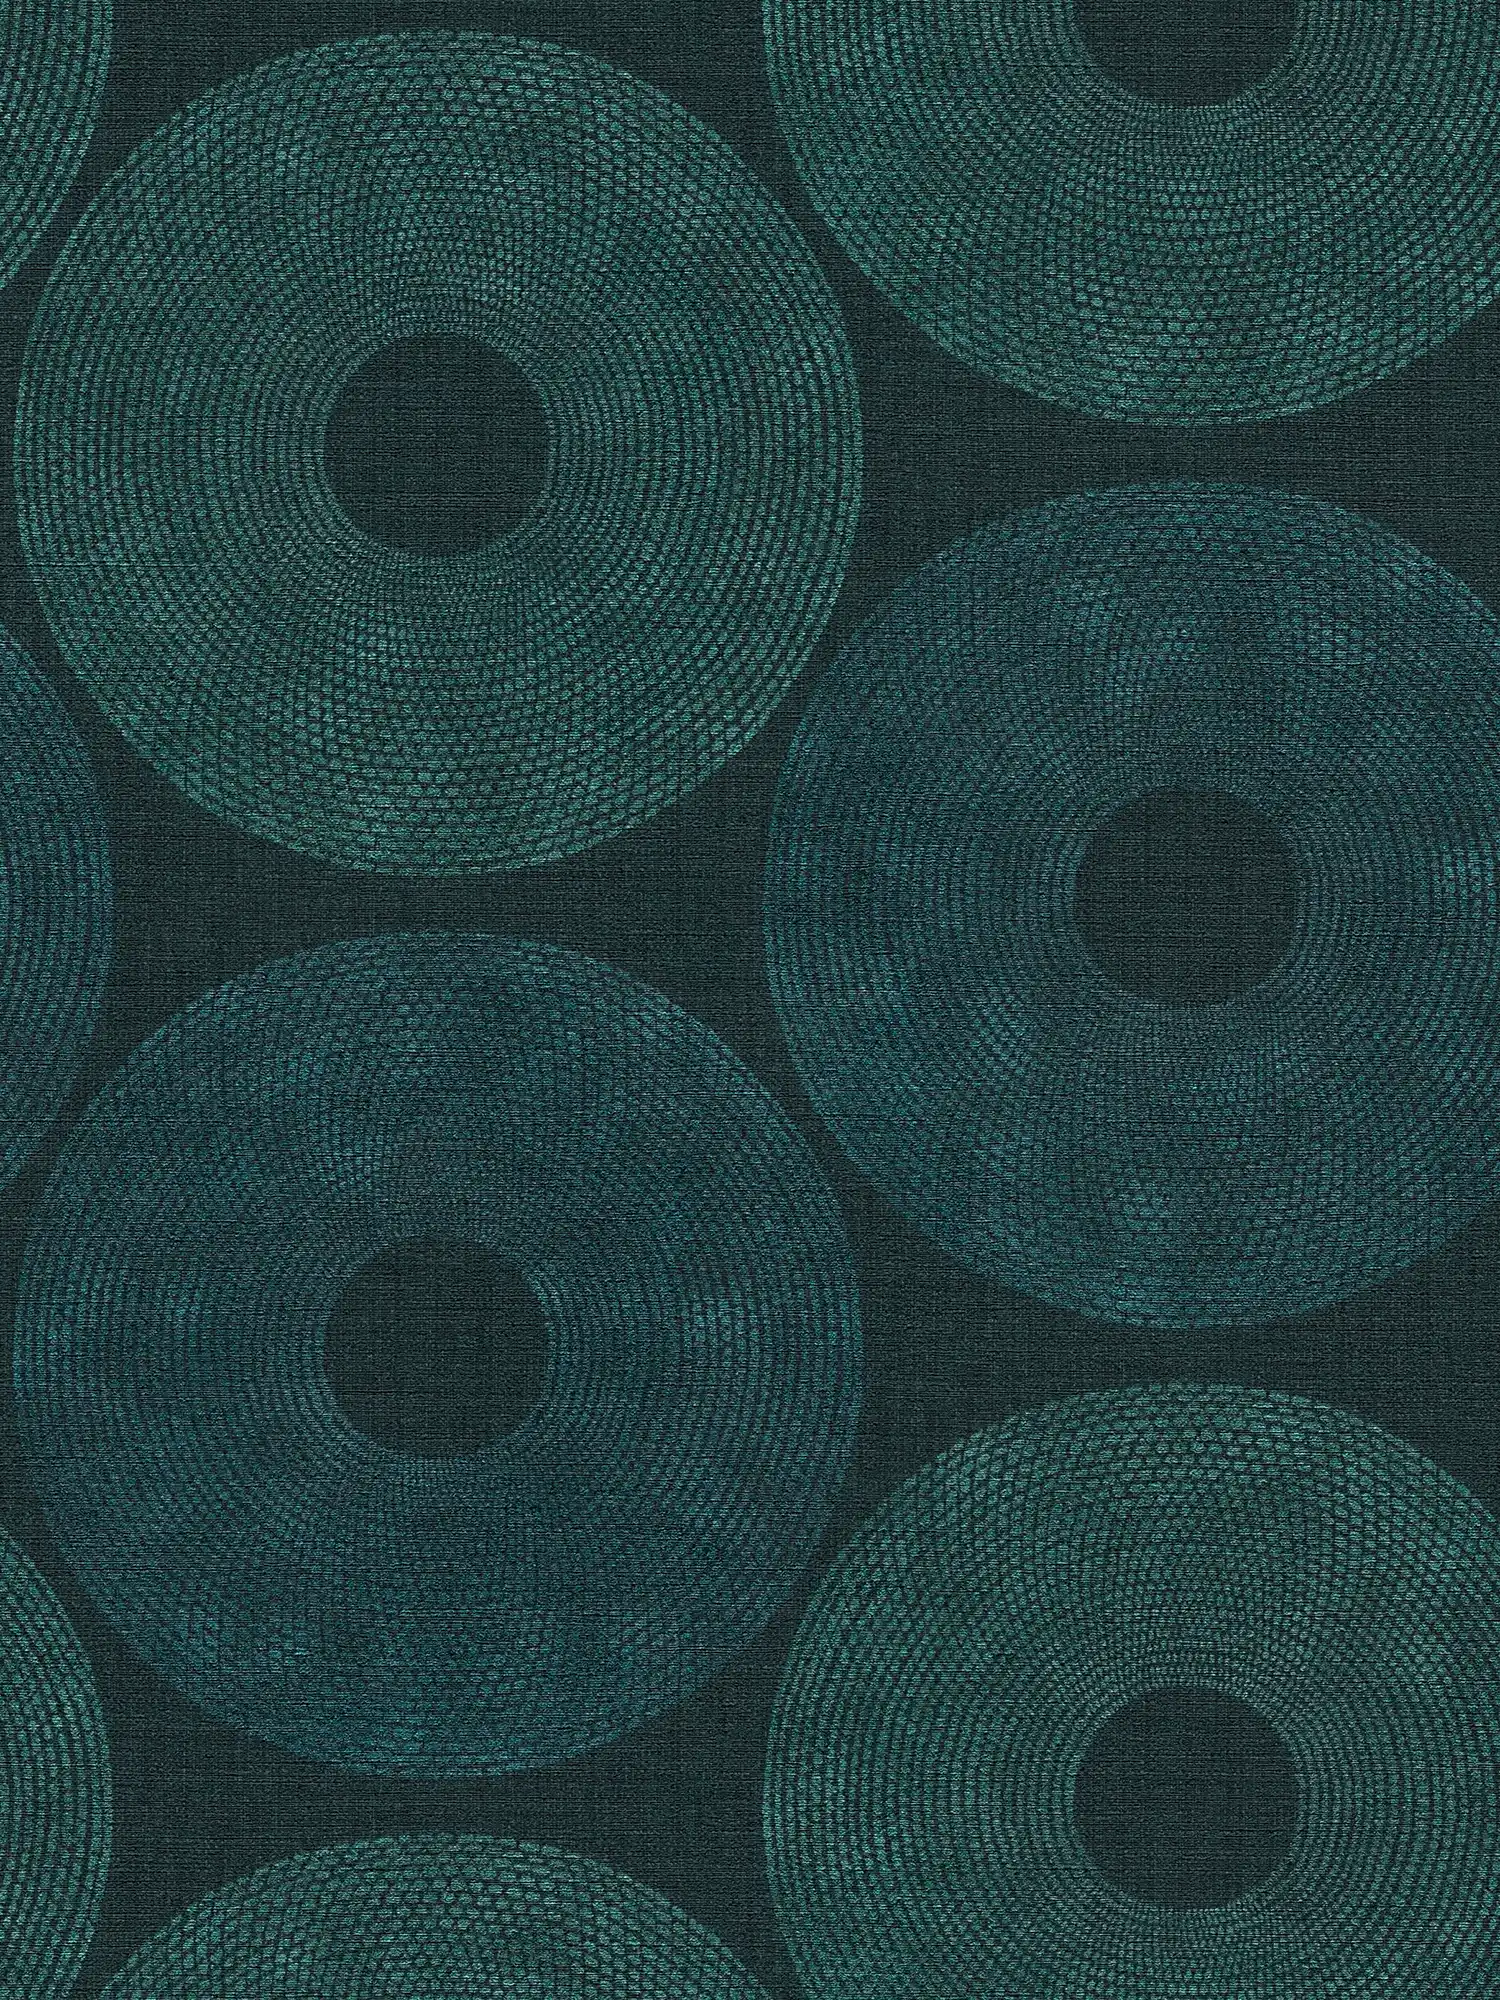 Ethno wallpaper circles with structure design - green, metallic
